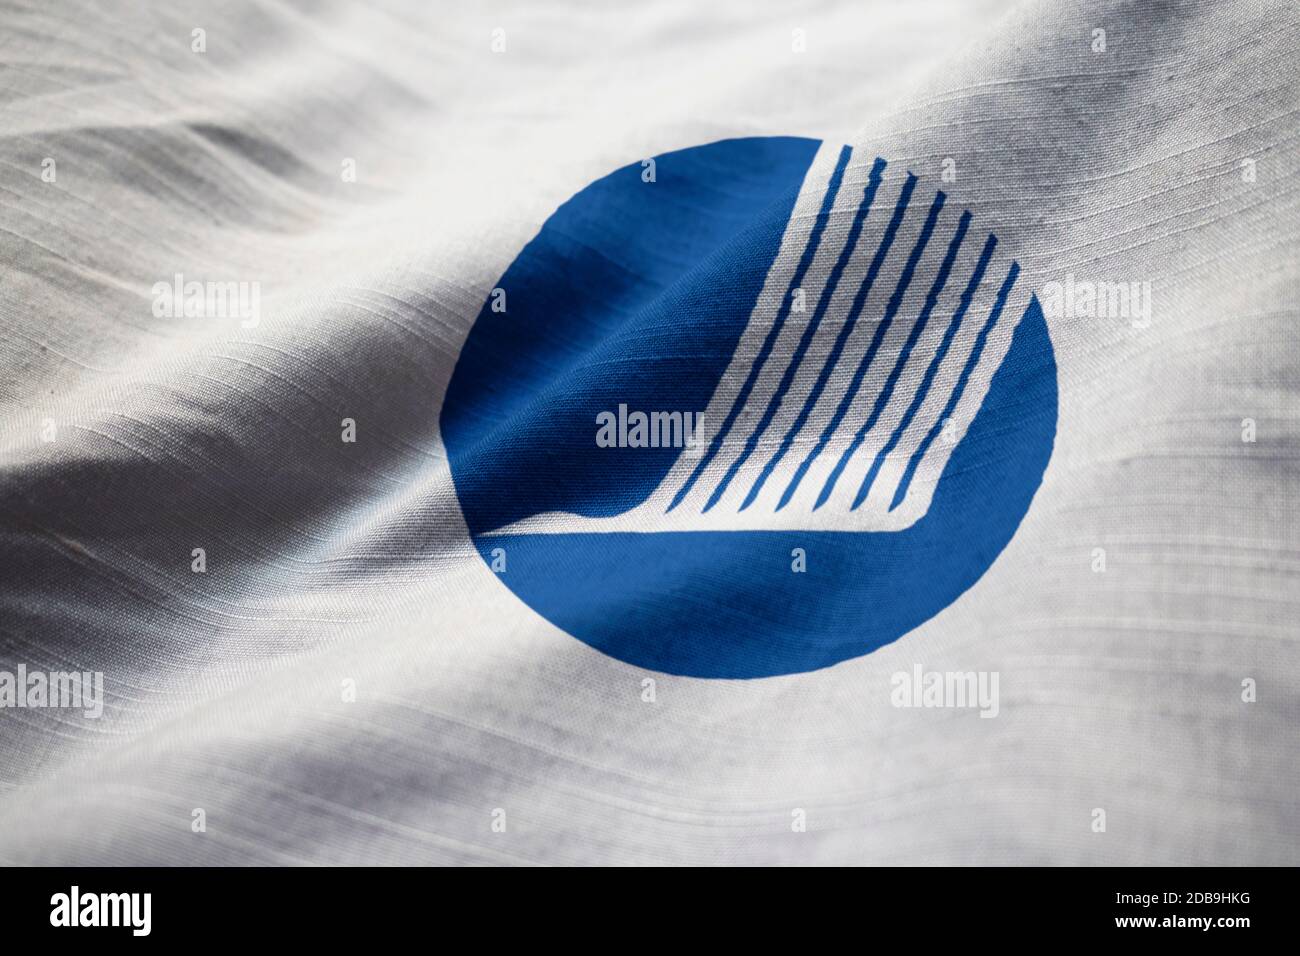 Closeup of Ruffled Nordic Council Flag, Nordic Council Flag Blowing in Wind Stock Photo